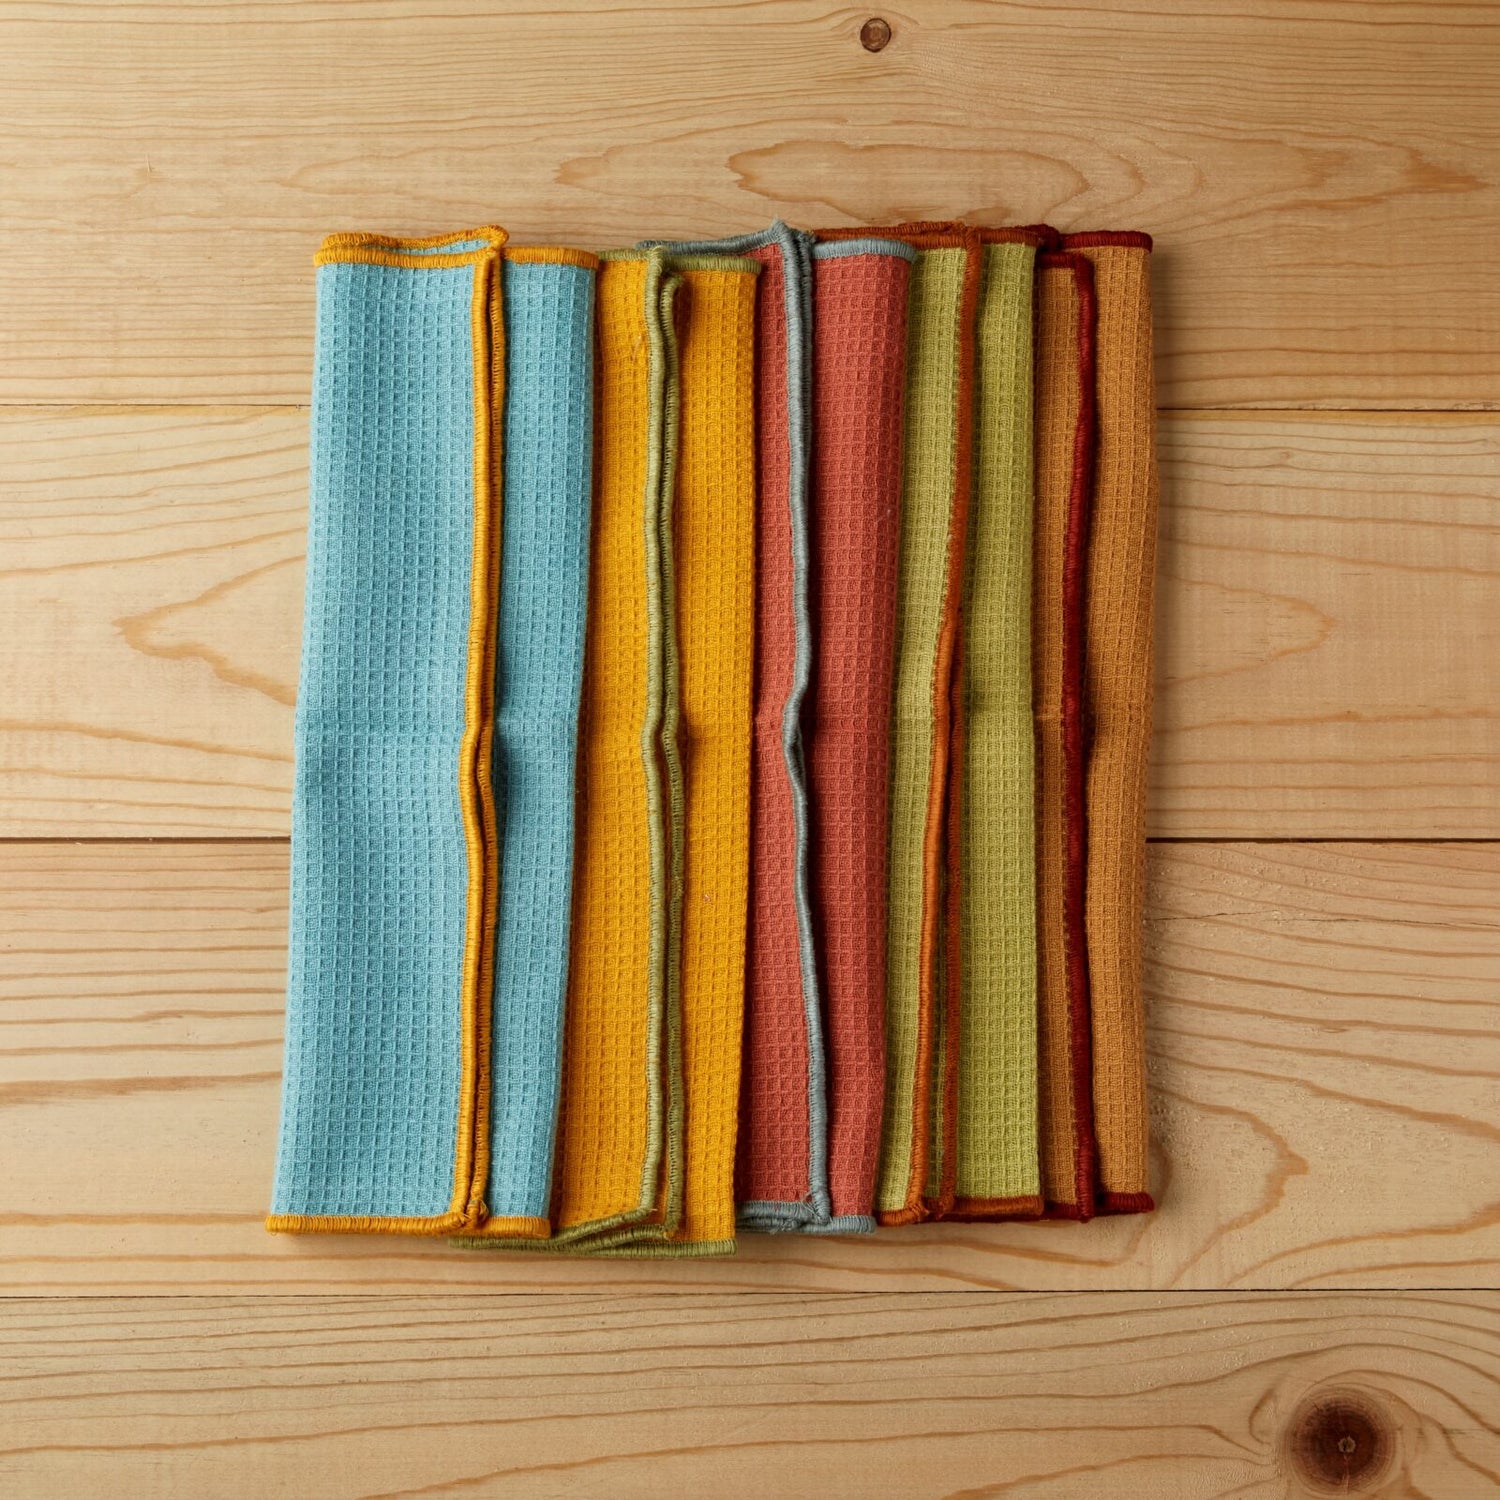 Harlow Dish Towels,Assorted Set of 5